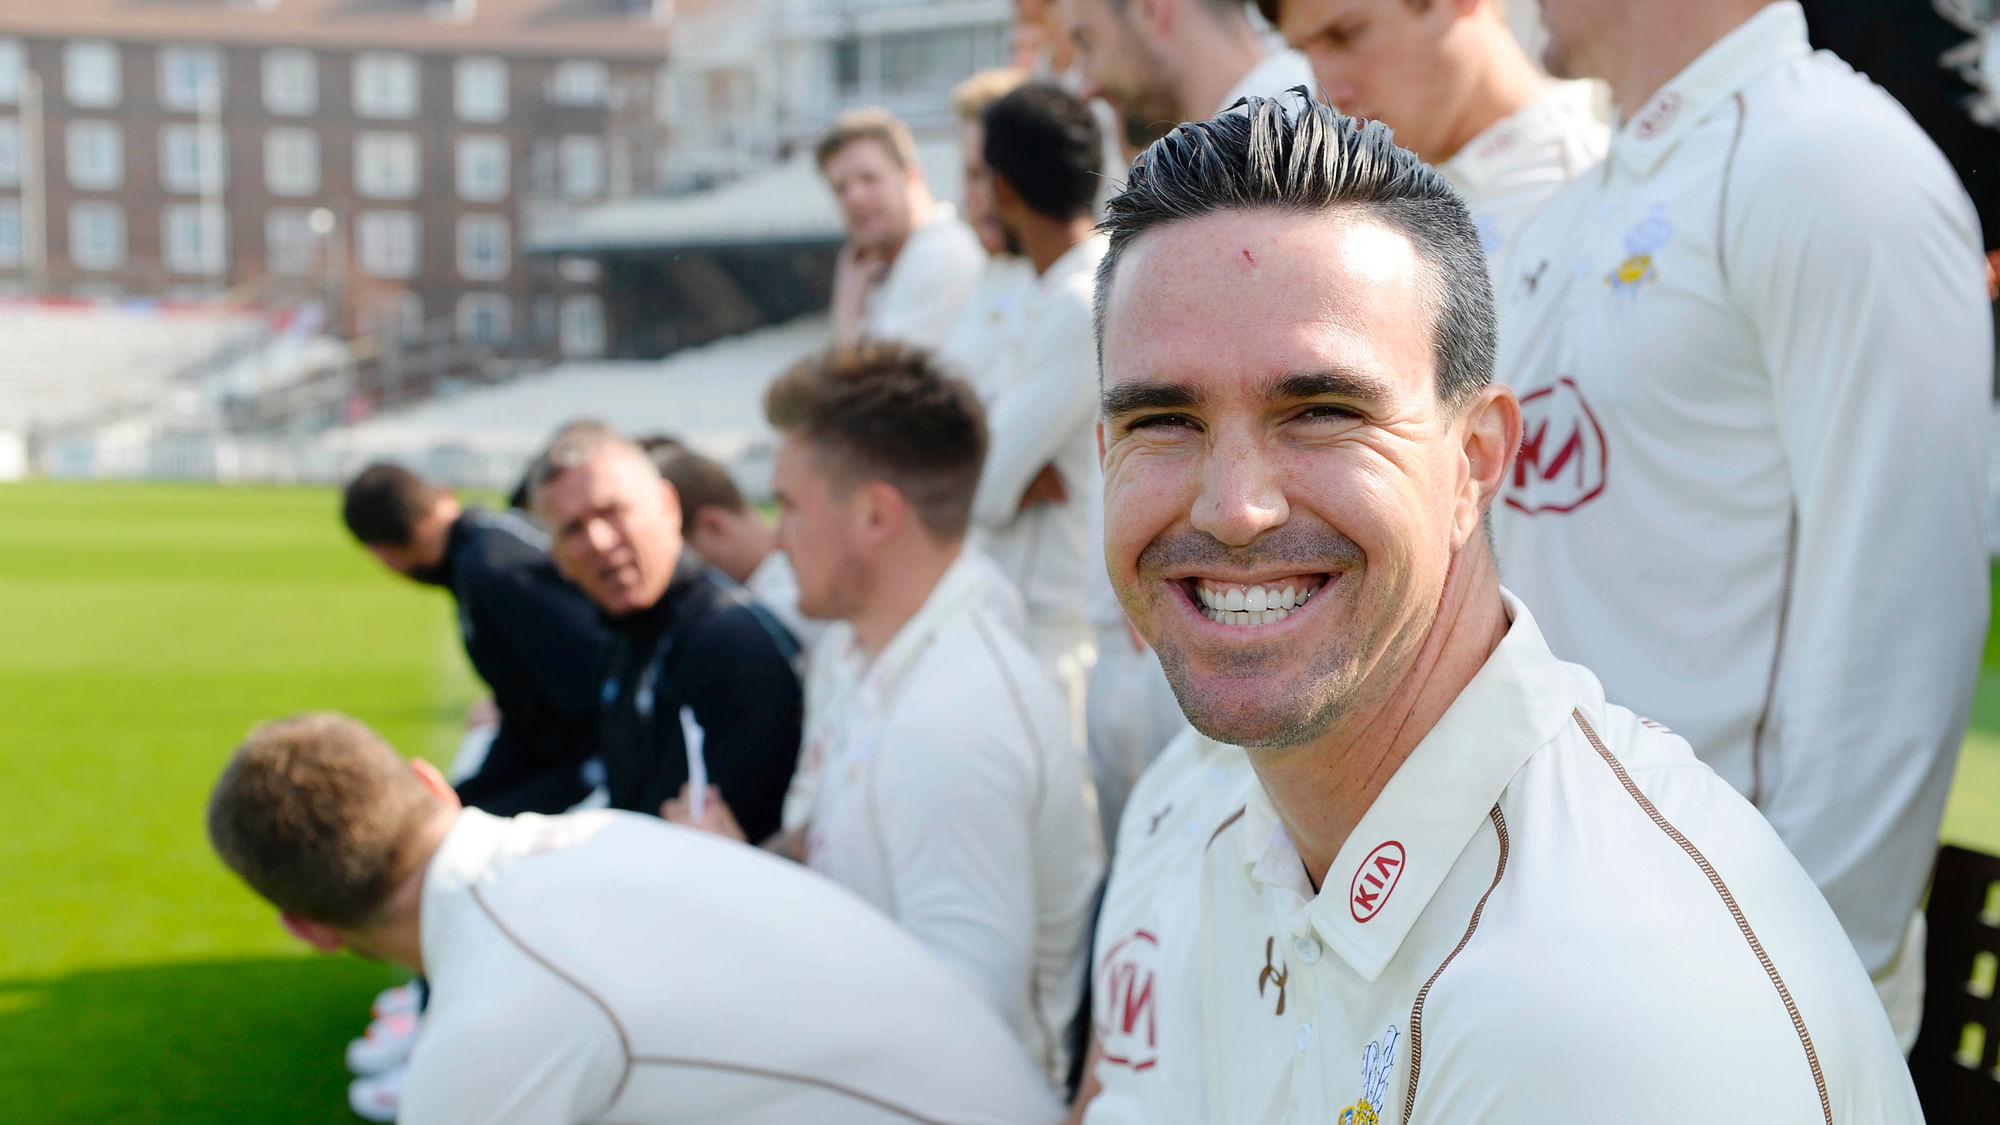 Kevin Pietersen during his stint with English county team Surrey. (Photo: Reuters)